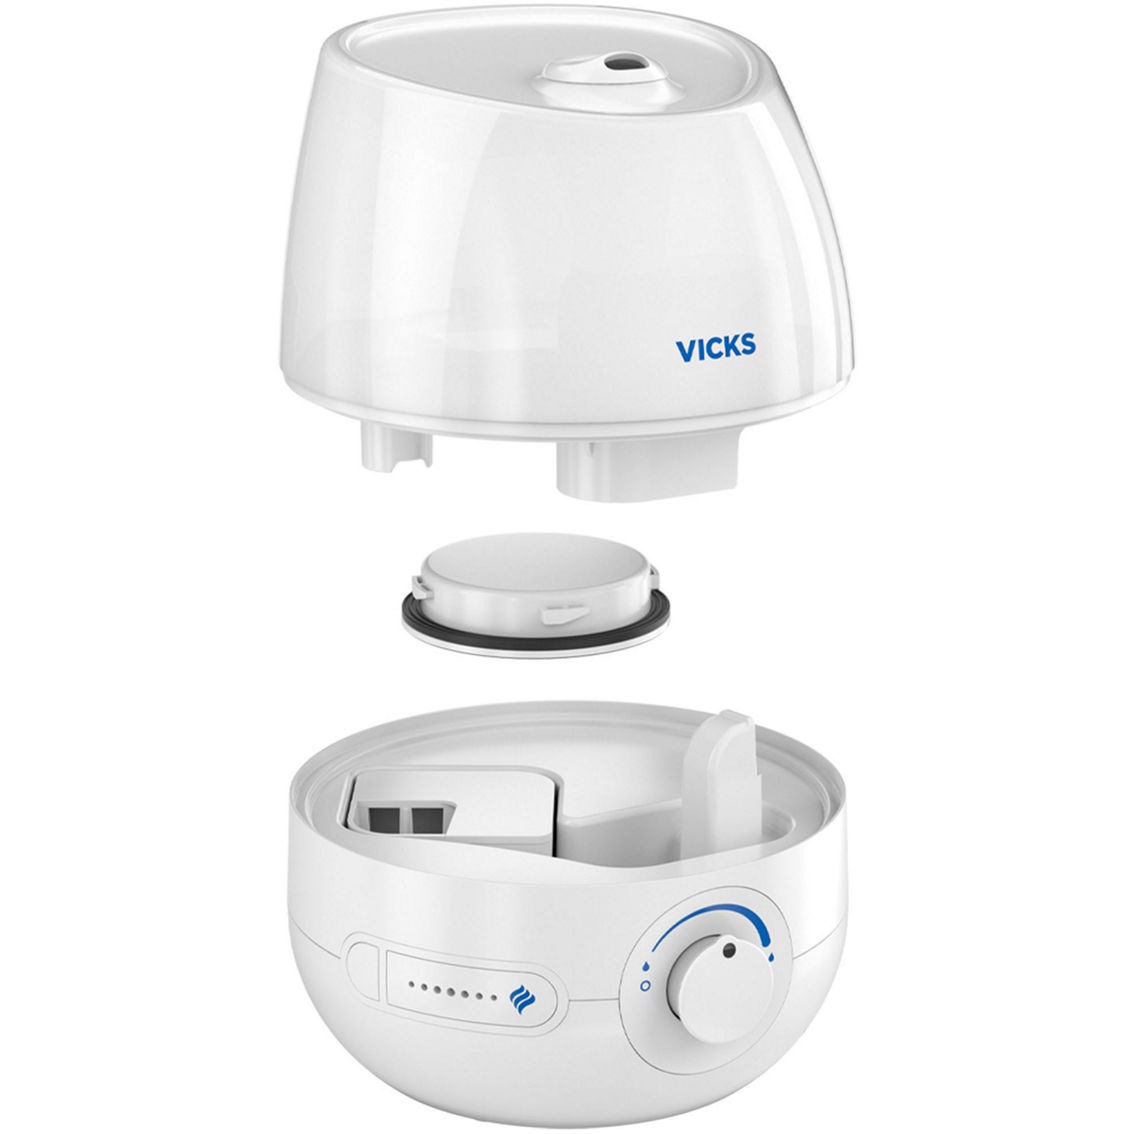 Vicks Cool Mist Humidifier - Image 2 of 7